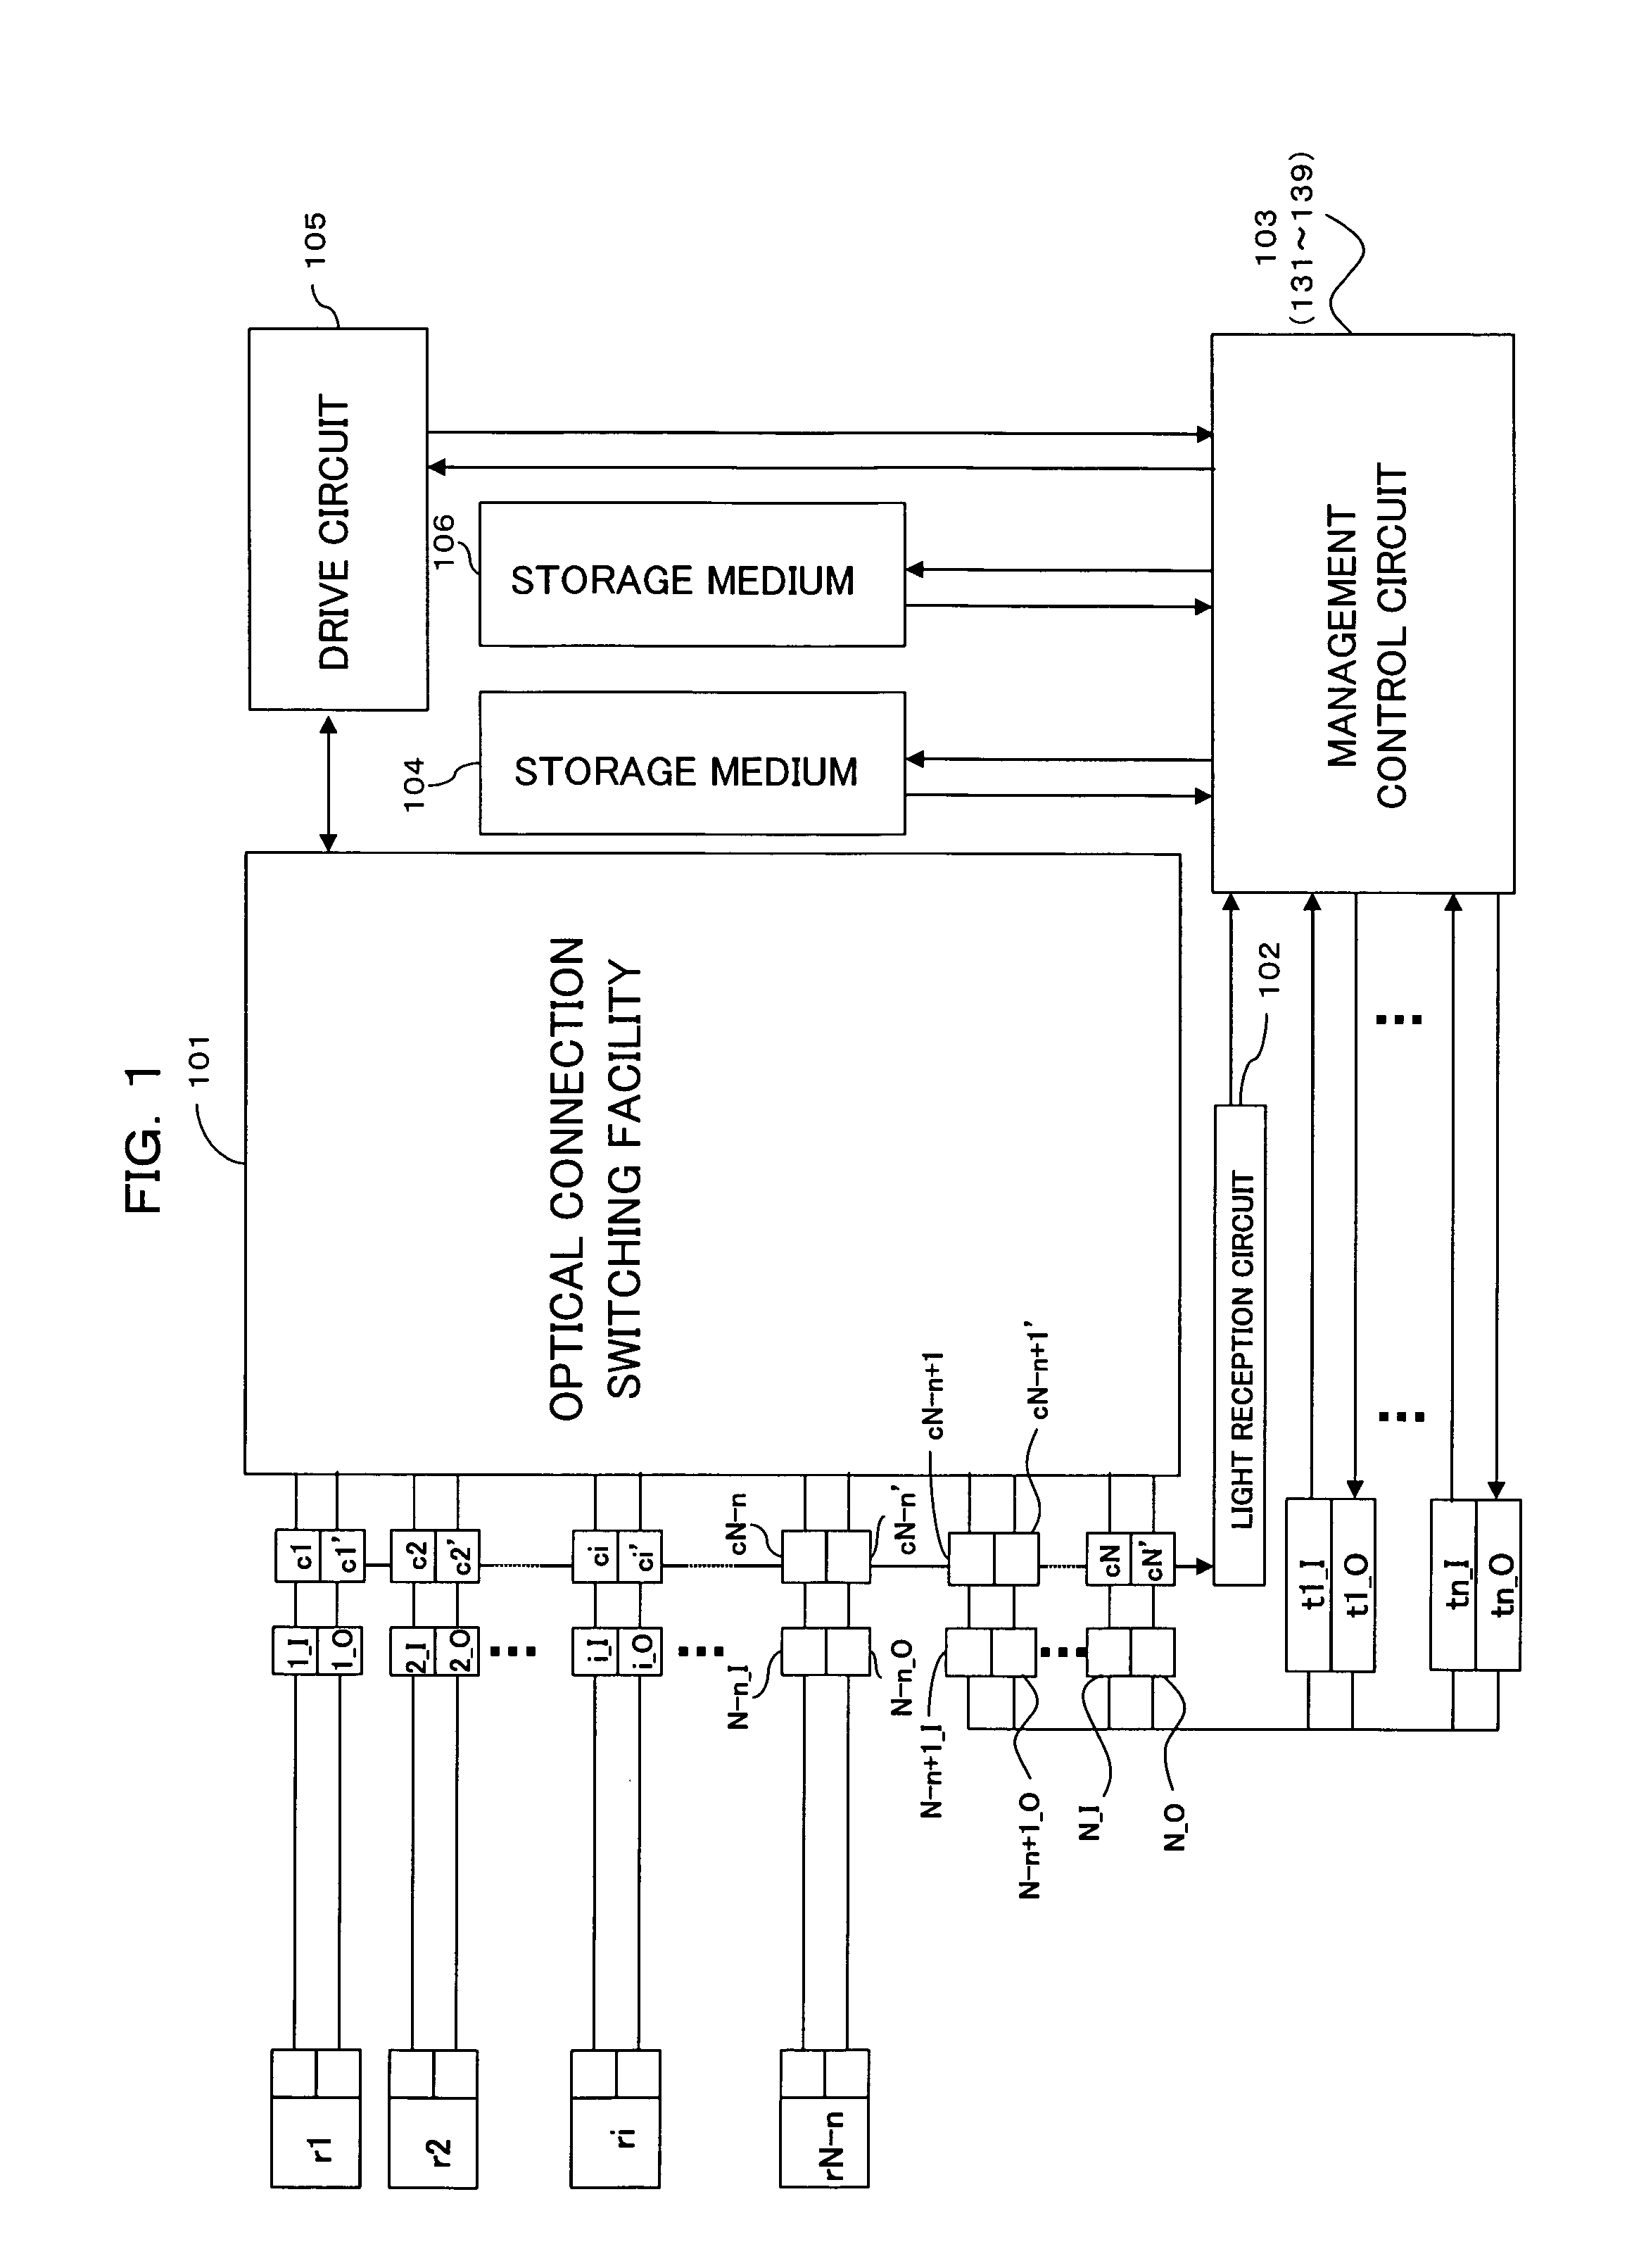 Optical connection switching apparatus and management control unit thereof